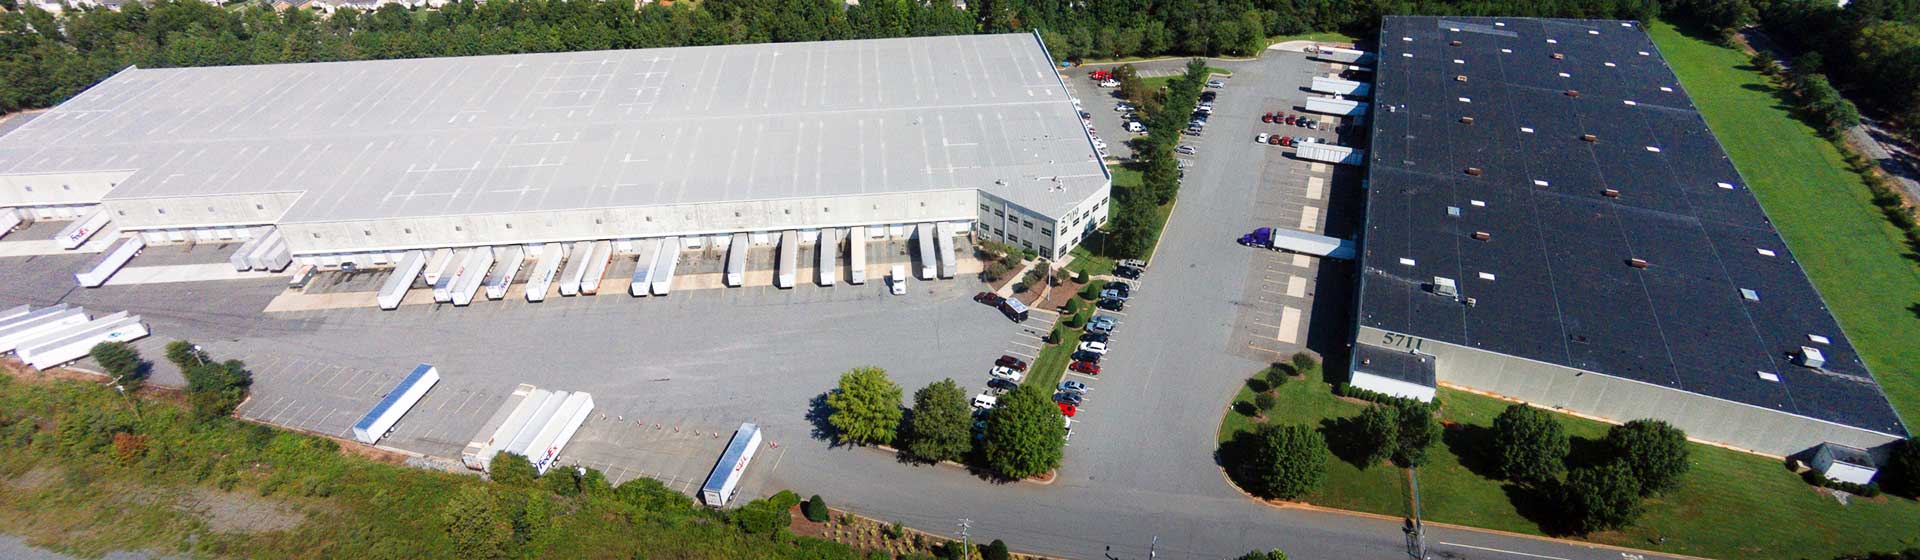 warehousing HQ overview